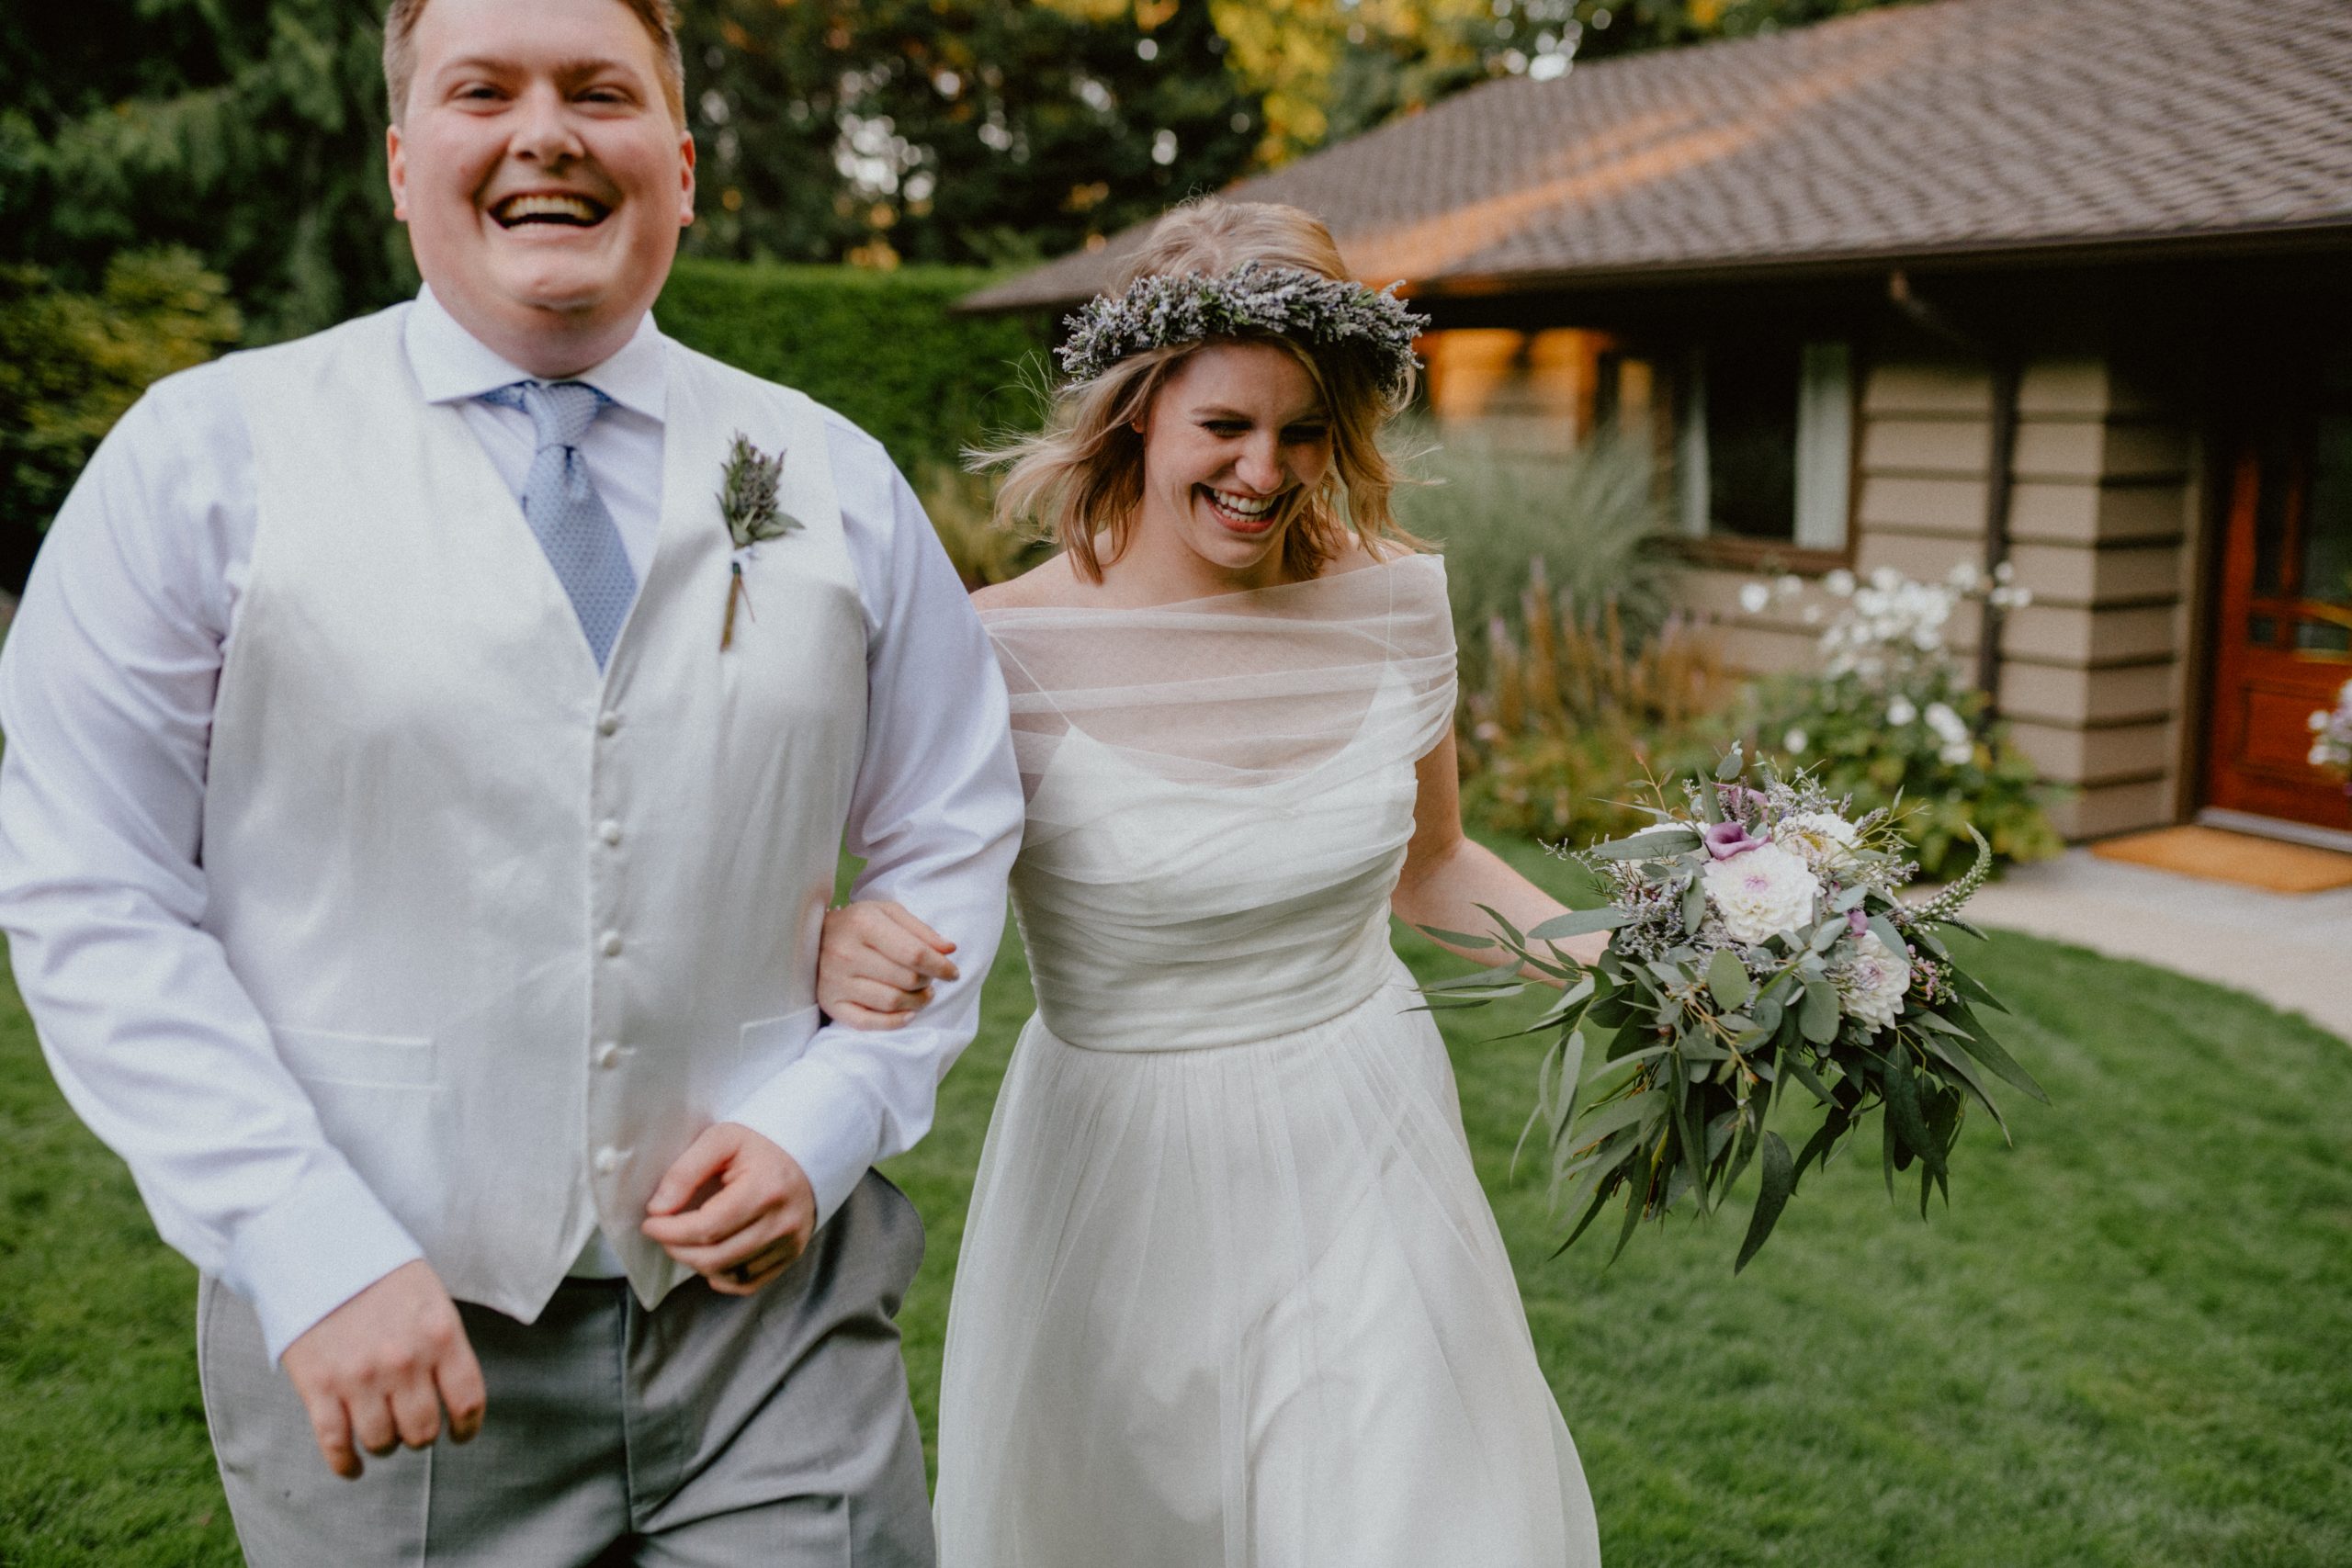 Bride and groom laugh and have fun after their intimate backyard elopement | Seattle Wedding Photographer, Seattle Elopement Photographer | chelseaabril.com